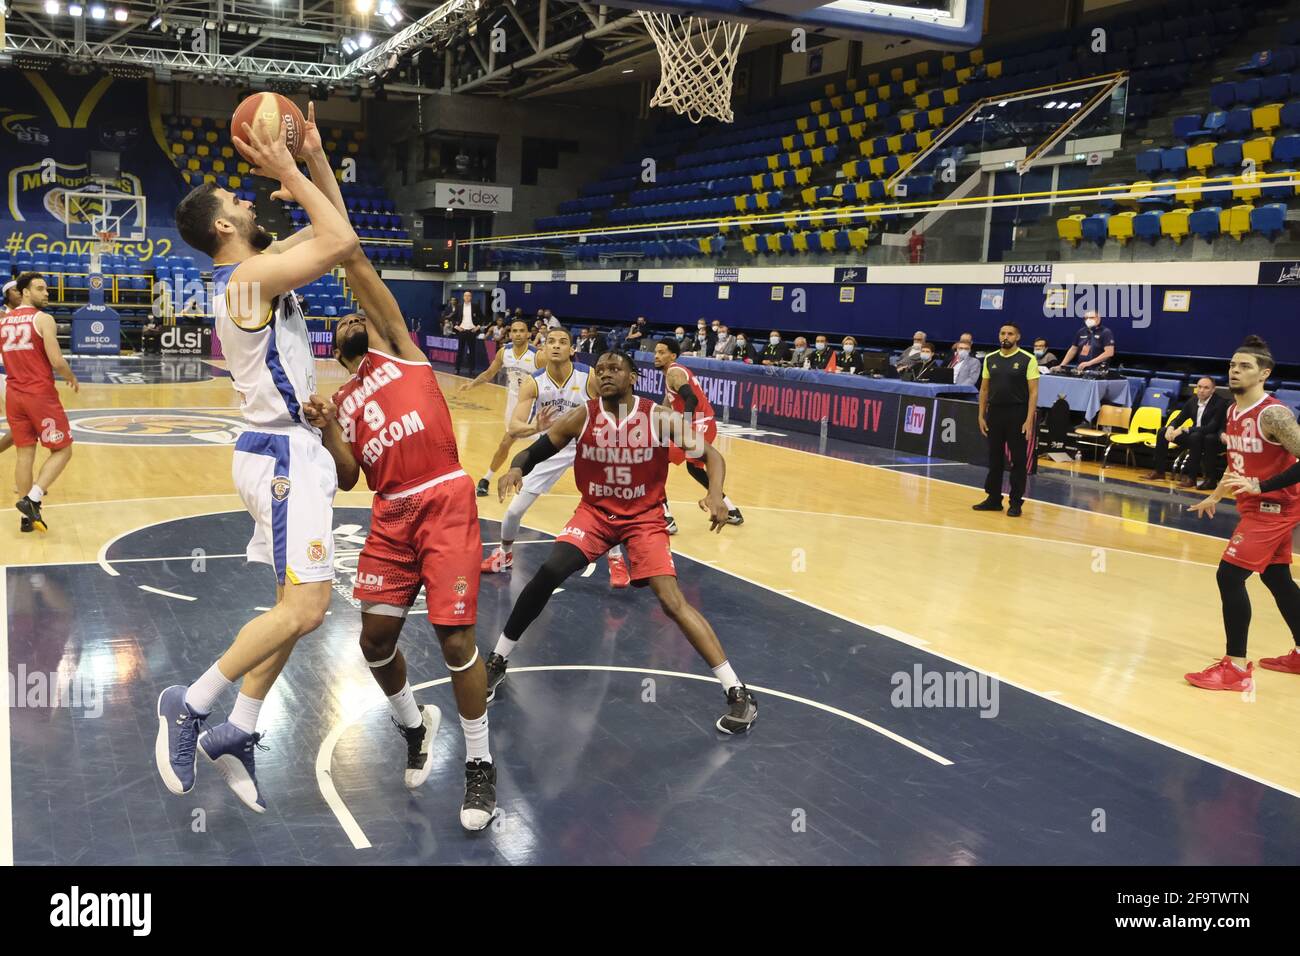 Levallois, Hauts de Seine, France. 20th Apr, 2021. TOMER GINAT power  forward of Levallois in action during the French Basket championship Jeep  Elite between Levallois and Monaco at Marcel Cerdant stadium -